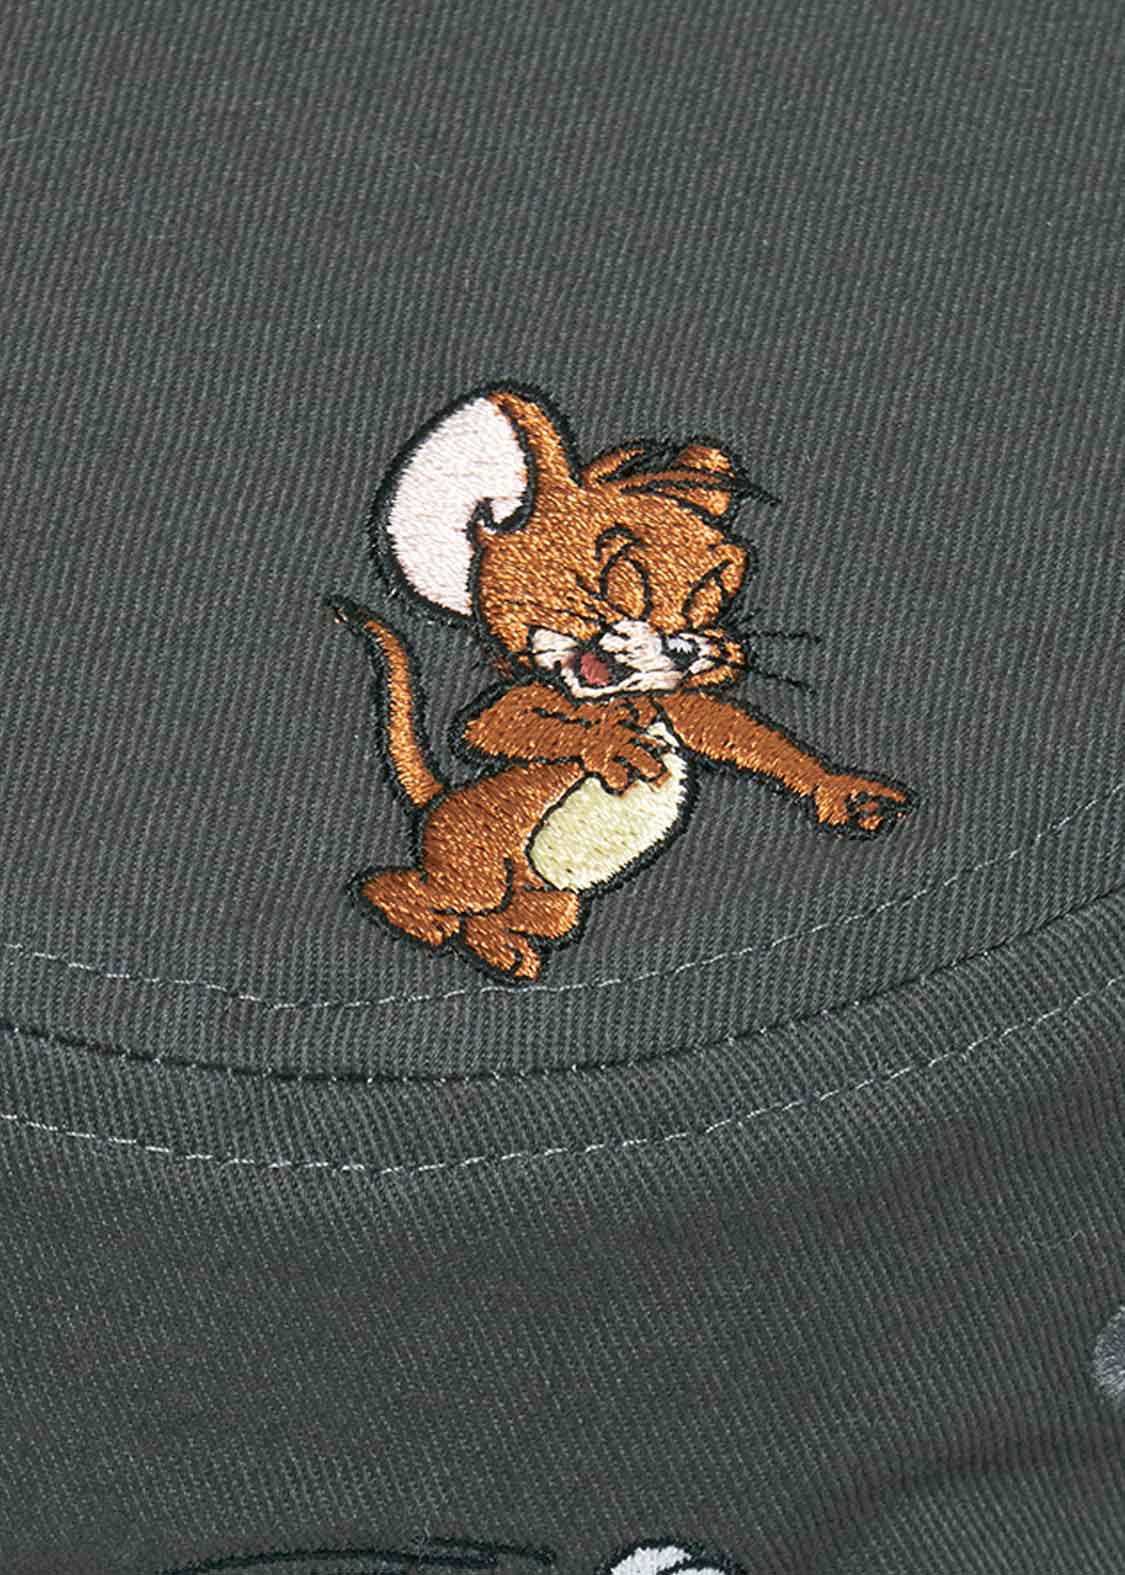 Tom and Jerry Bucket Hat (Tom and Jerry_Fall)